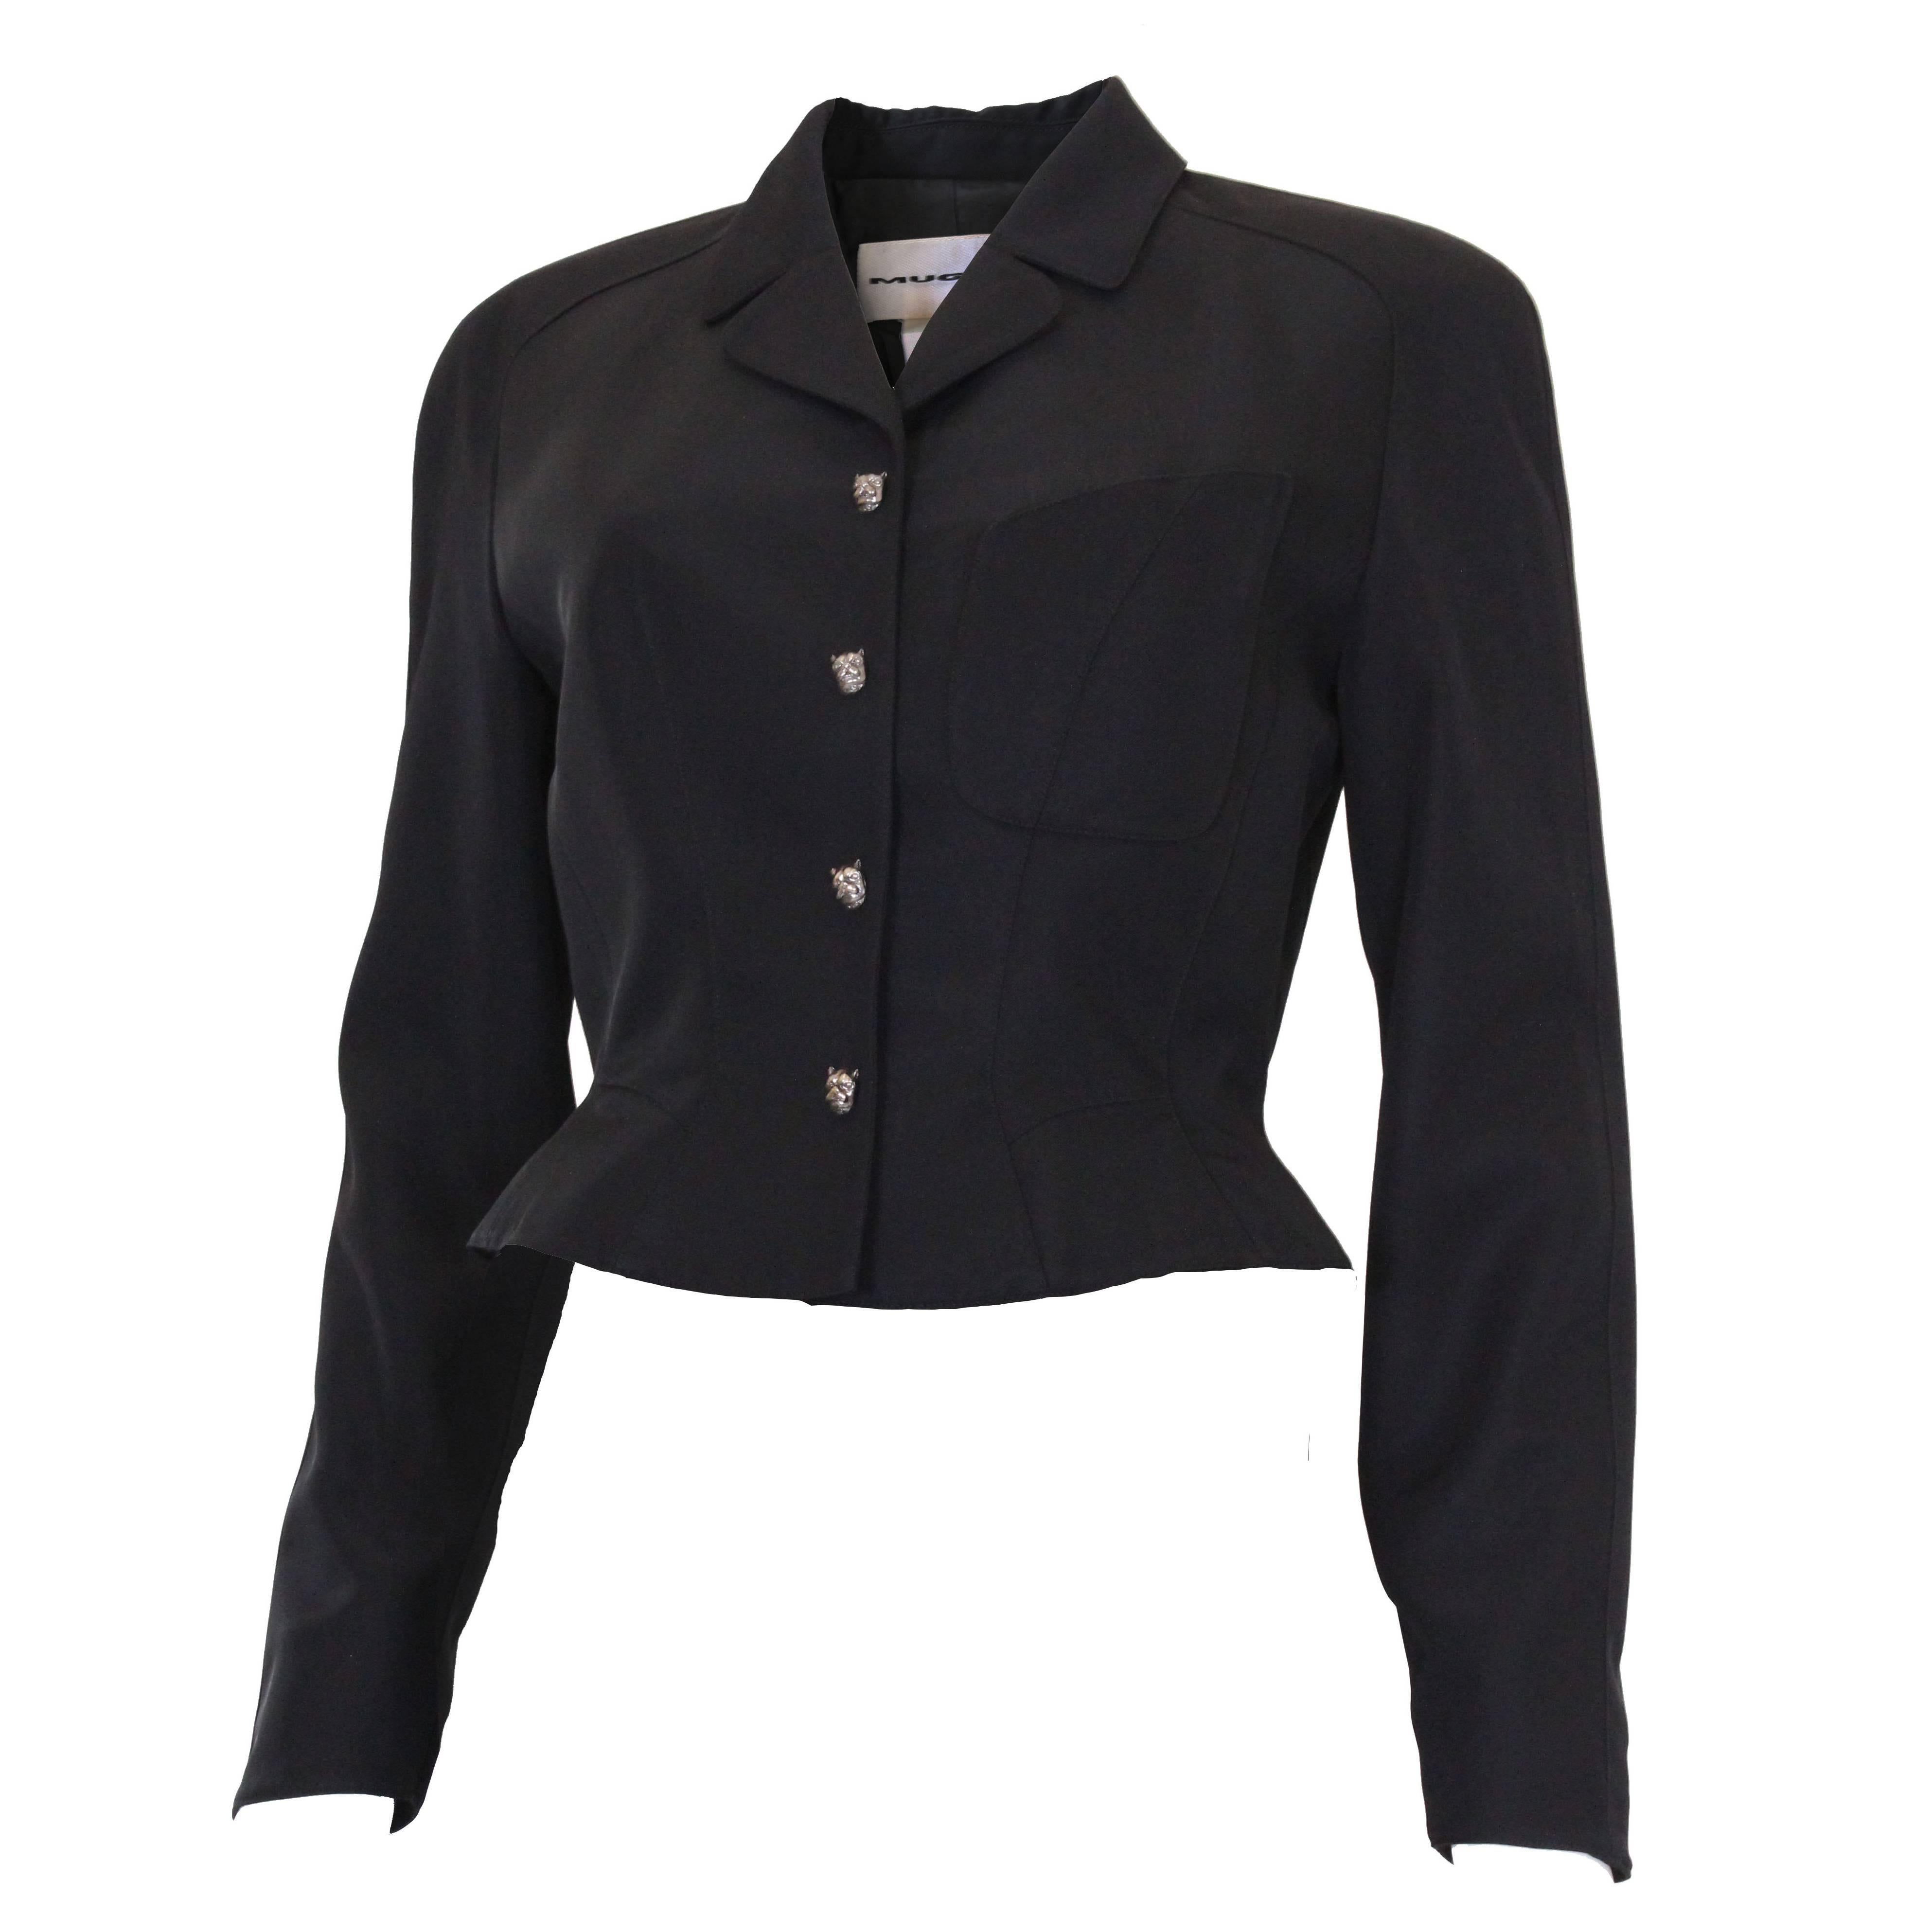 Late 1980s Black Thierry Mugler Structured Jacket